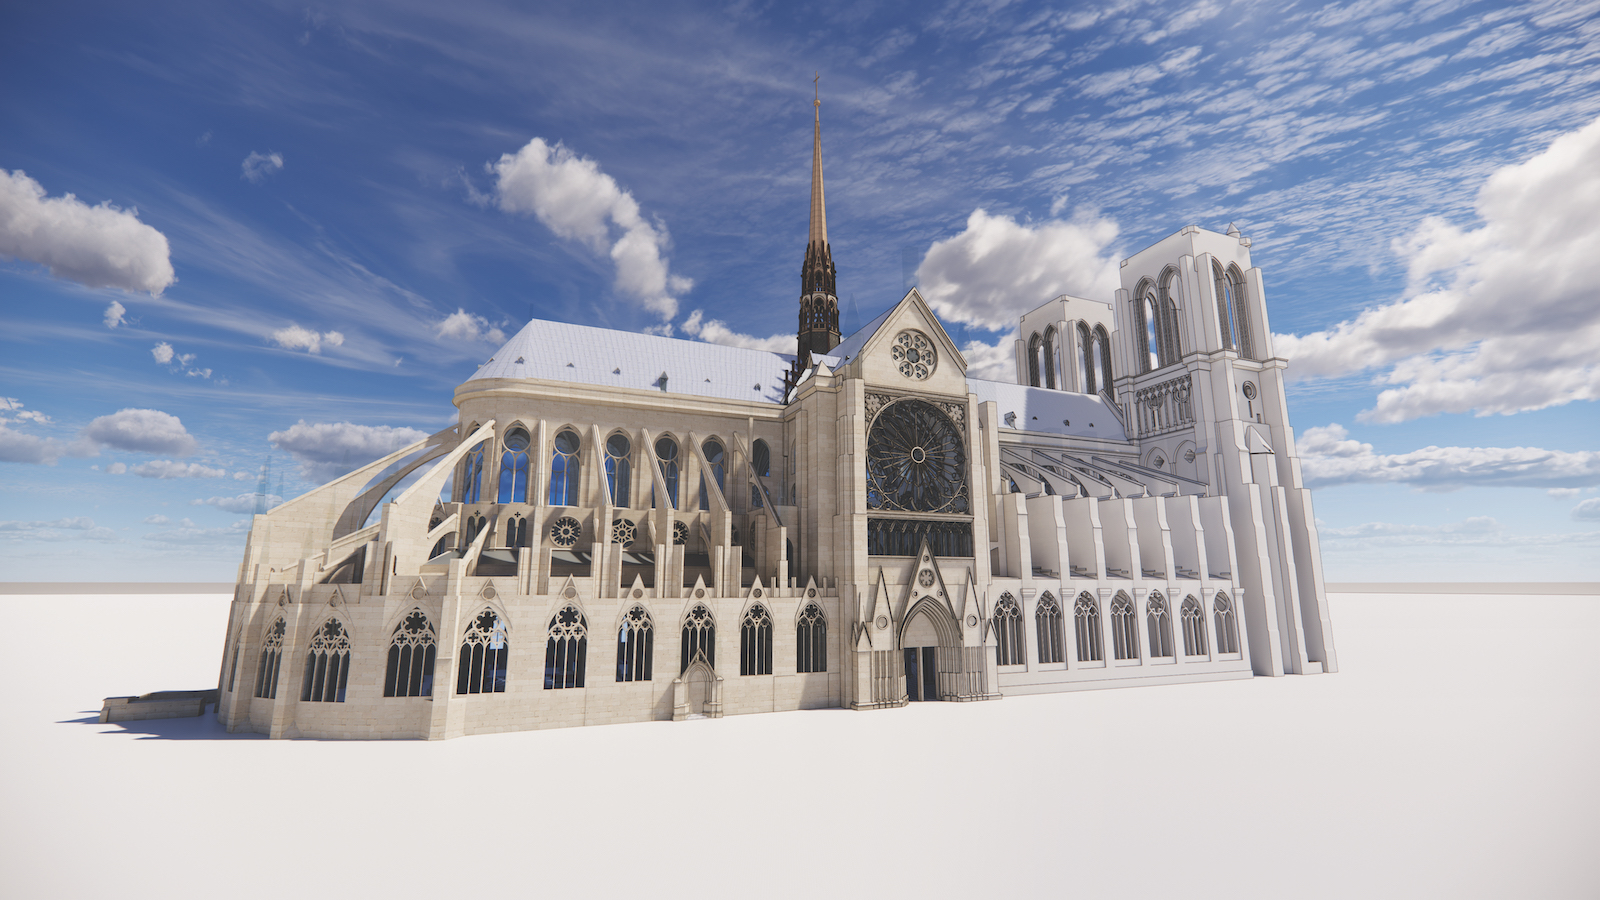 The French government has created 3D models of Notre-Dame cathedral in Paris with the support of Autodesk. Image credit: Autodesk